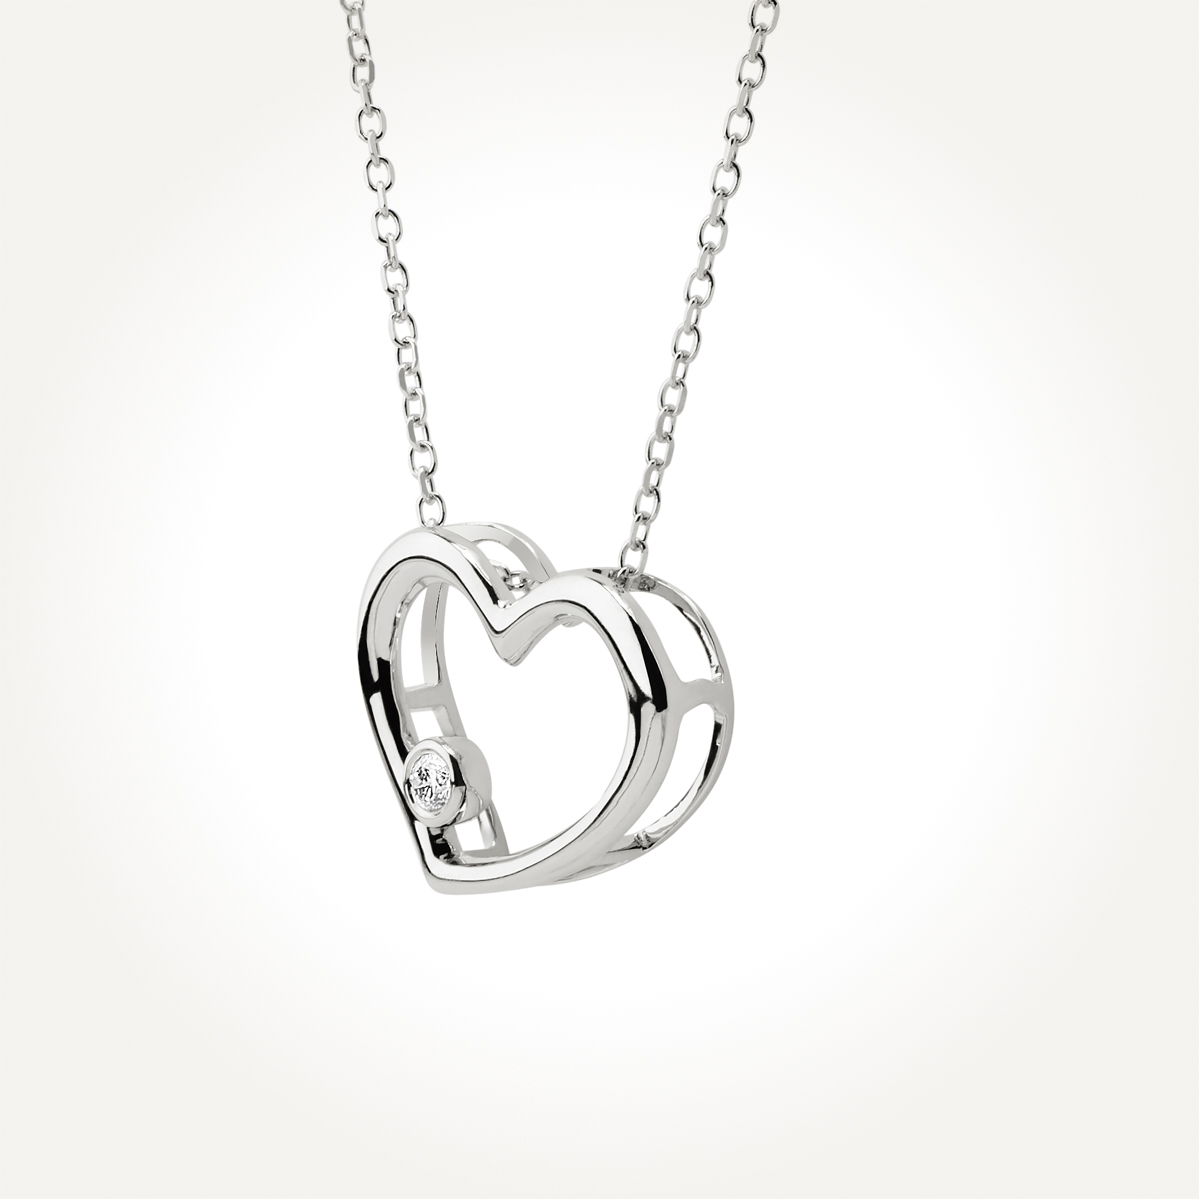 14KT White Gold Solitaire Heart Necklace